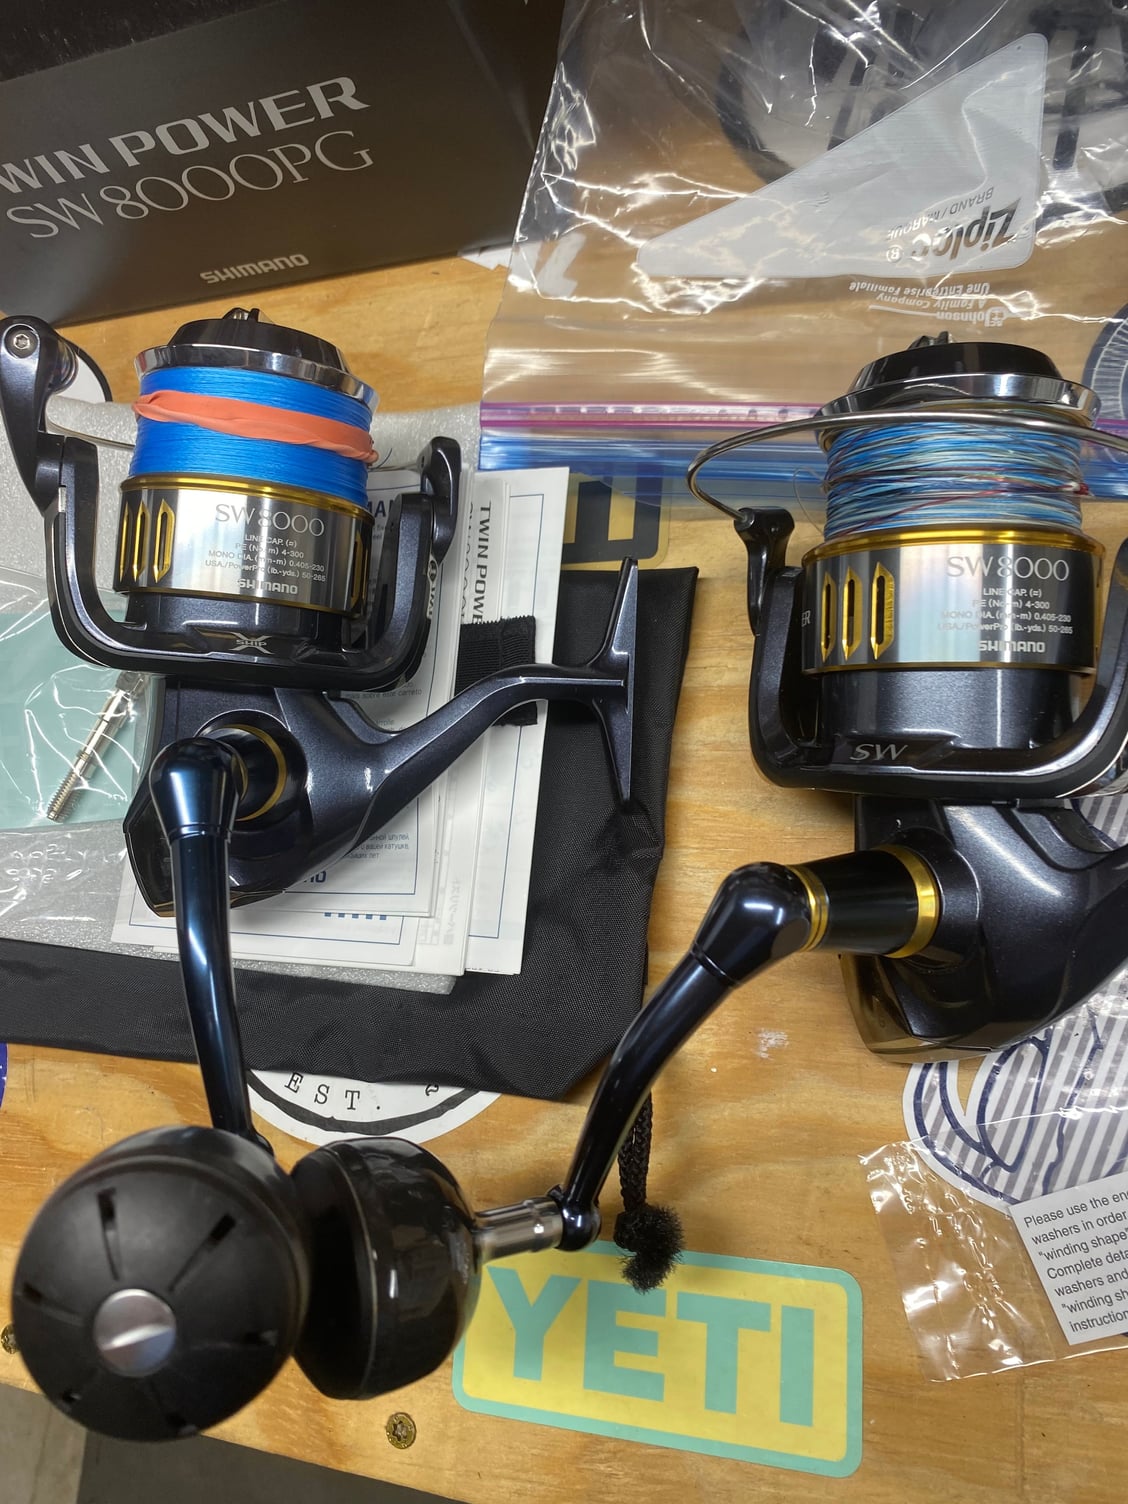 2 shimano twinpower 8000 for sale - The Hull Truth - Boating and Fishing  Forum